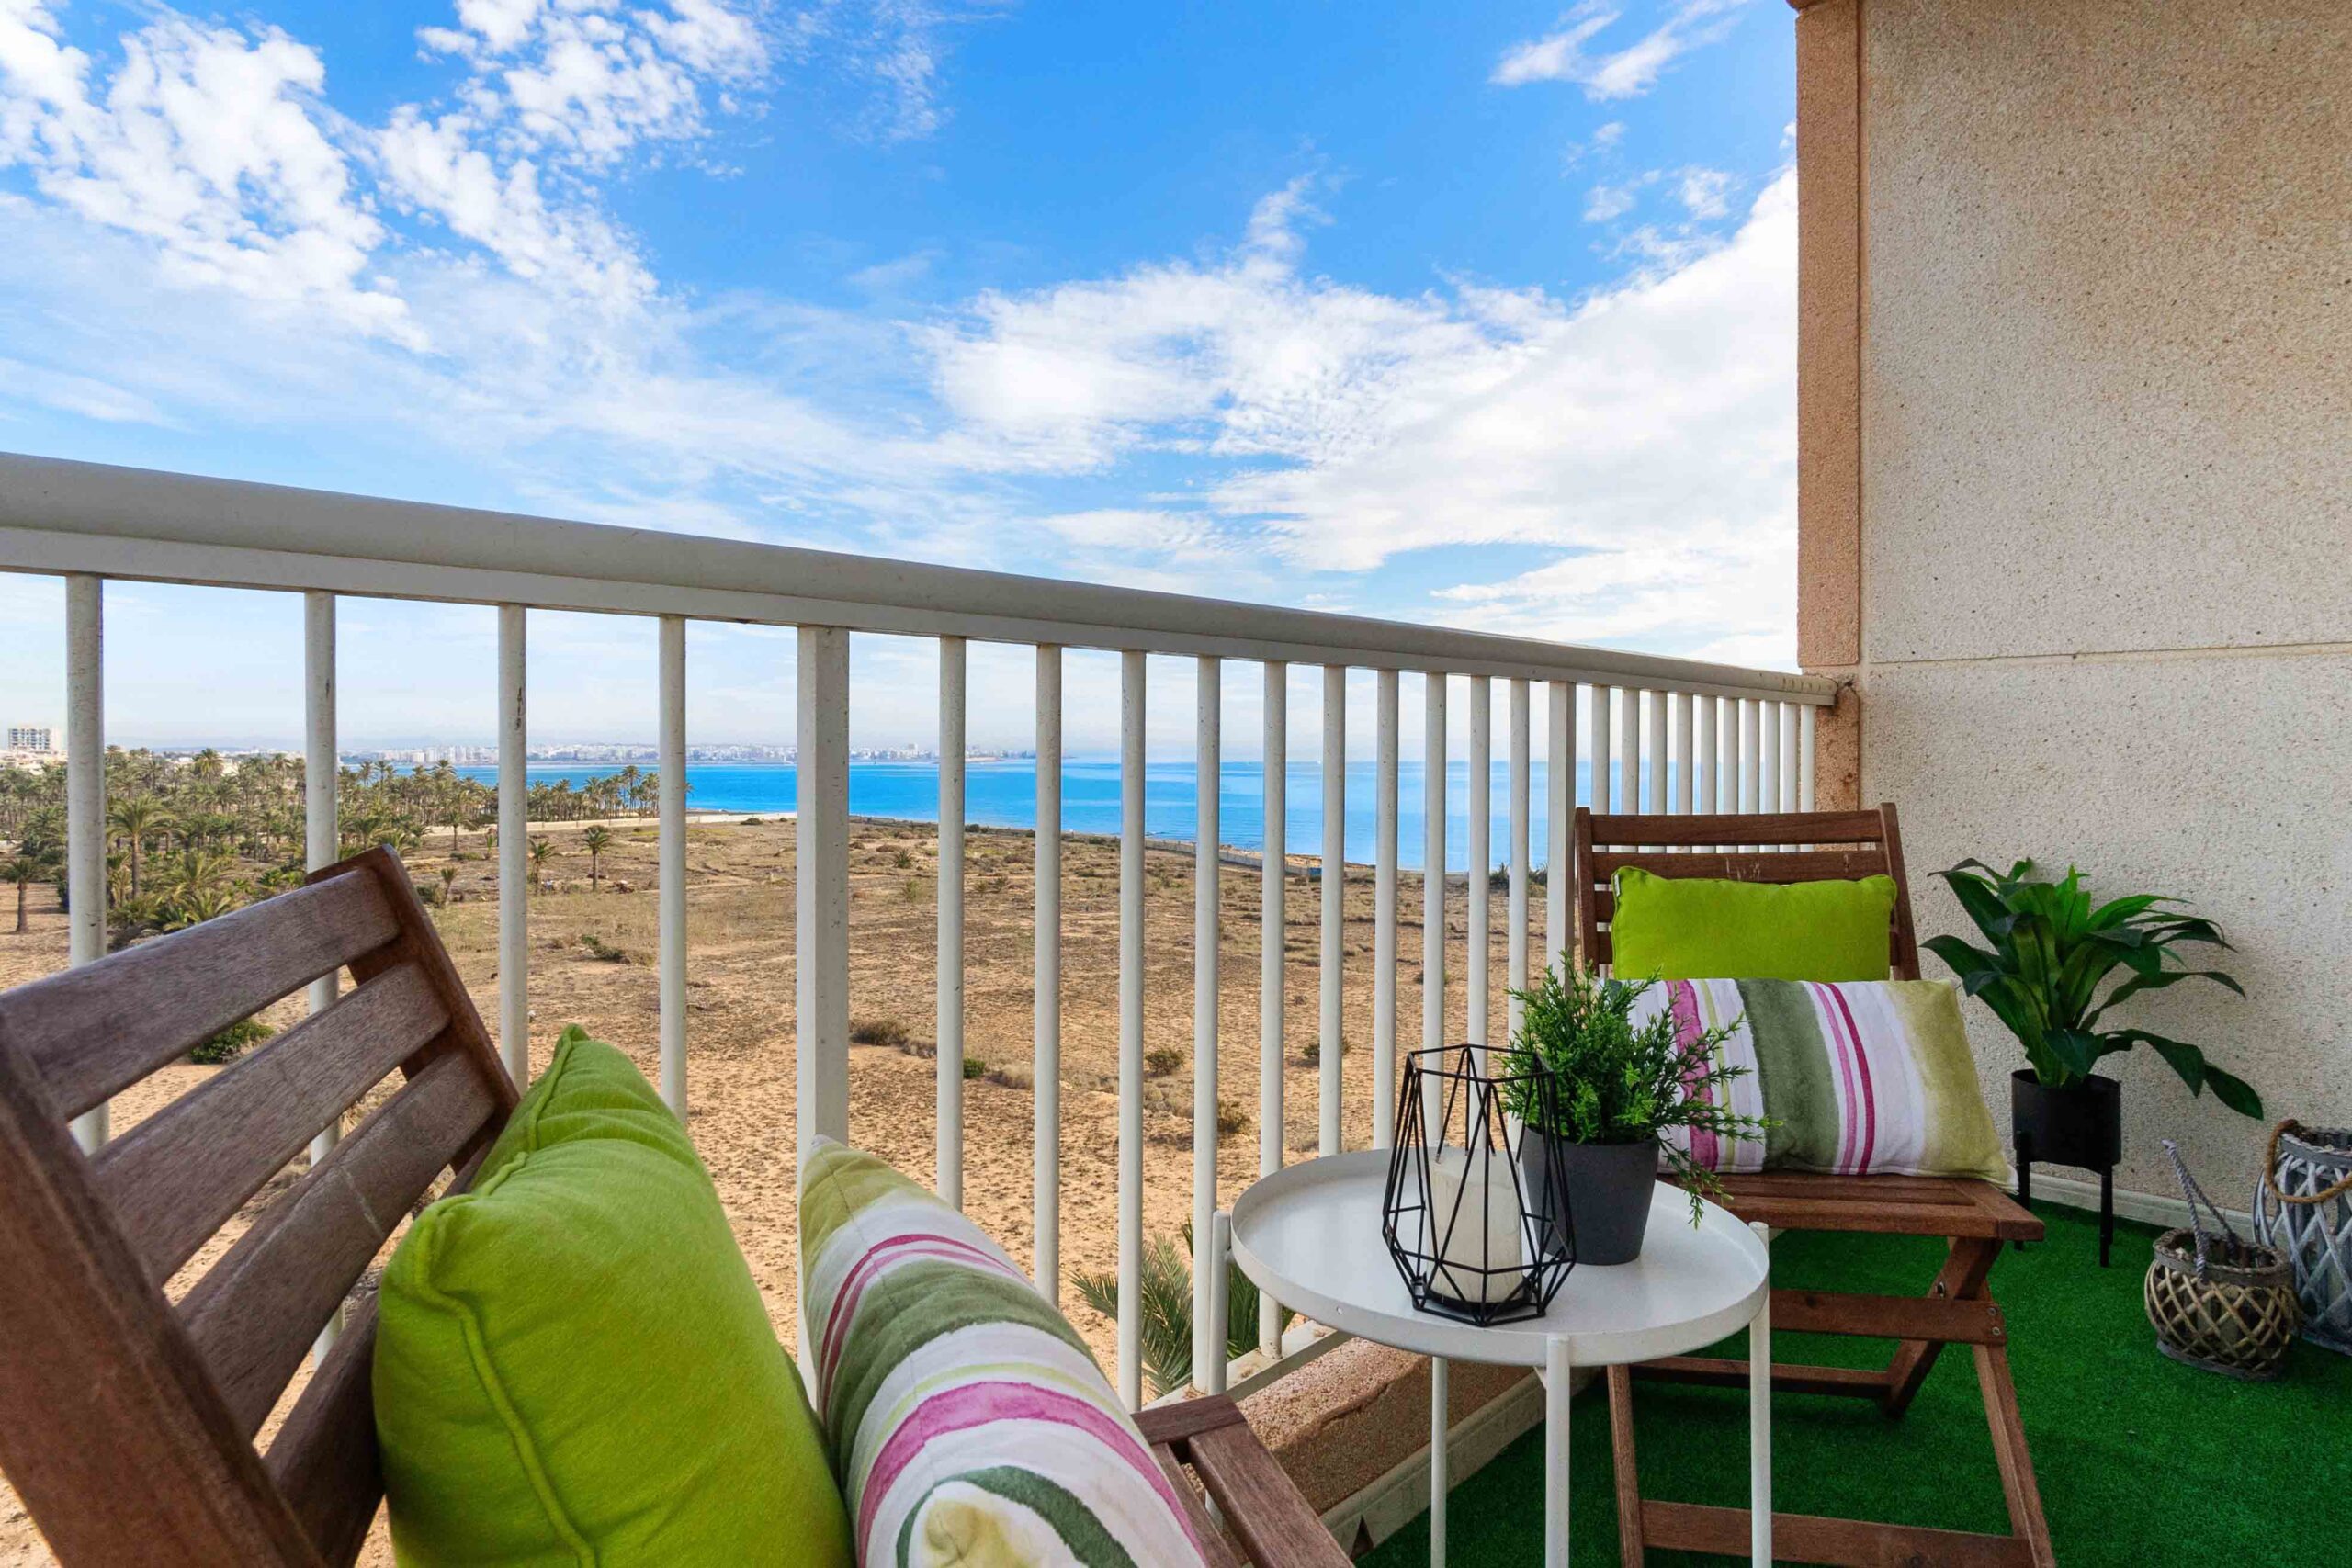 Nice holiday apartment for sale with sea view and parking space at 50m from the beach in Punta Prima.